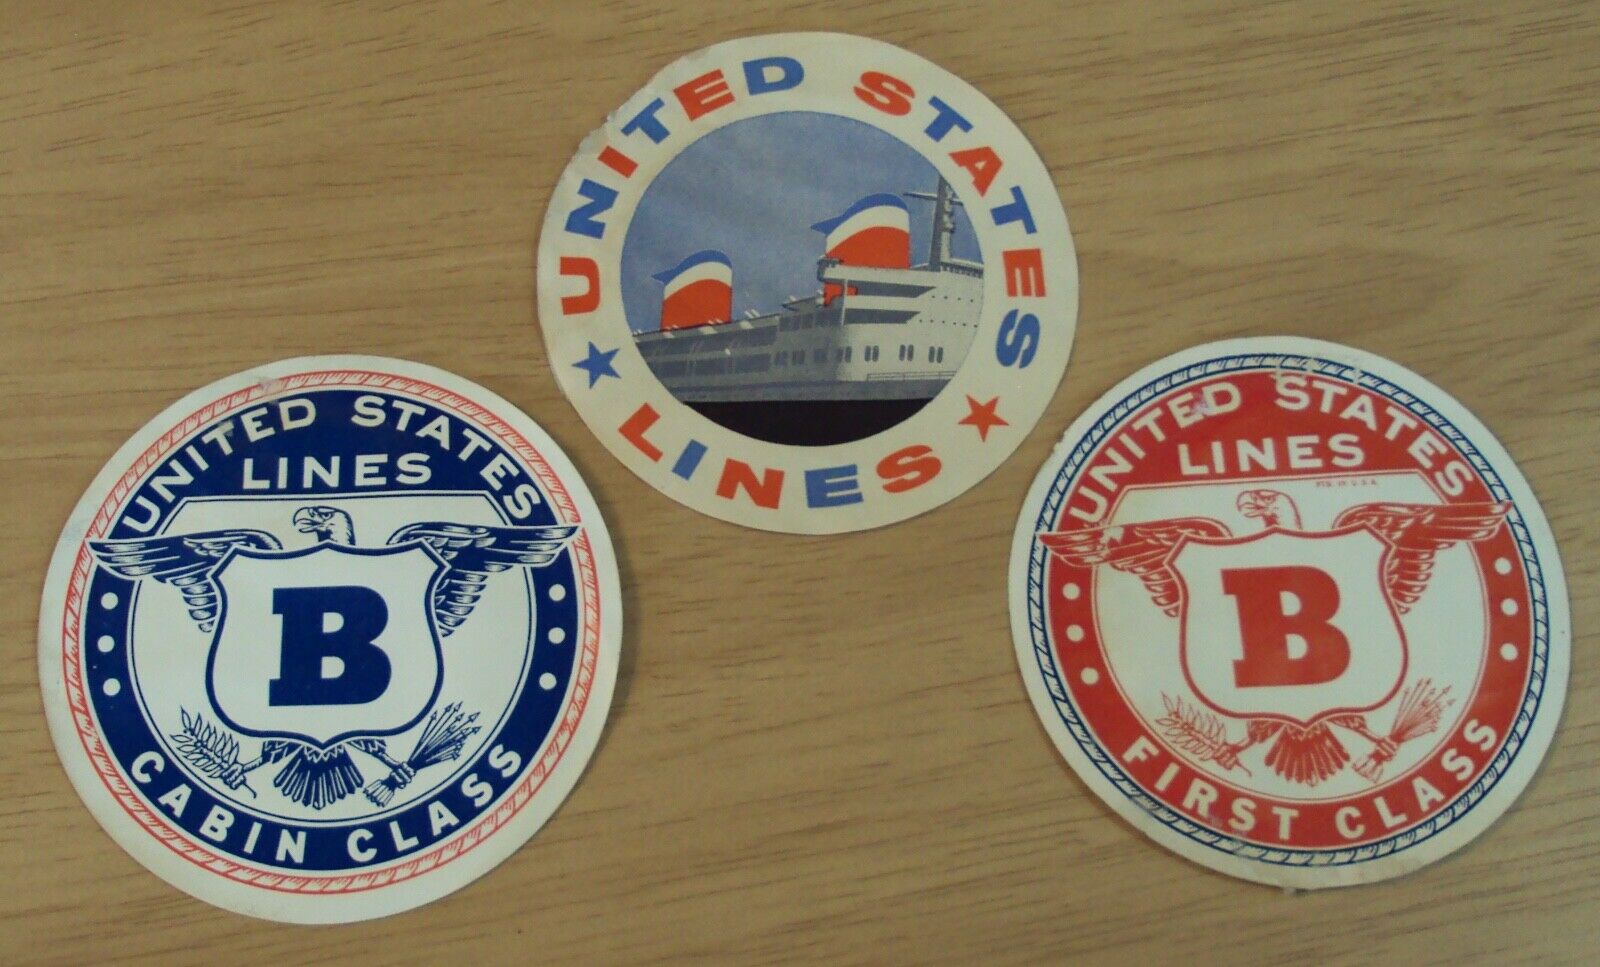 Vintage Steamship Travel 'luggage Decal/sticker' Lot "united States Lines"~